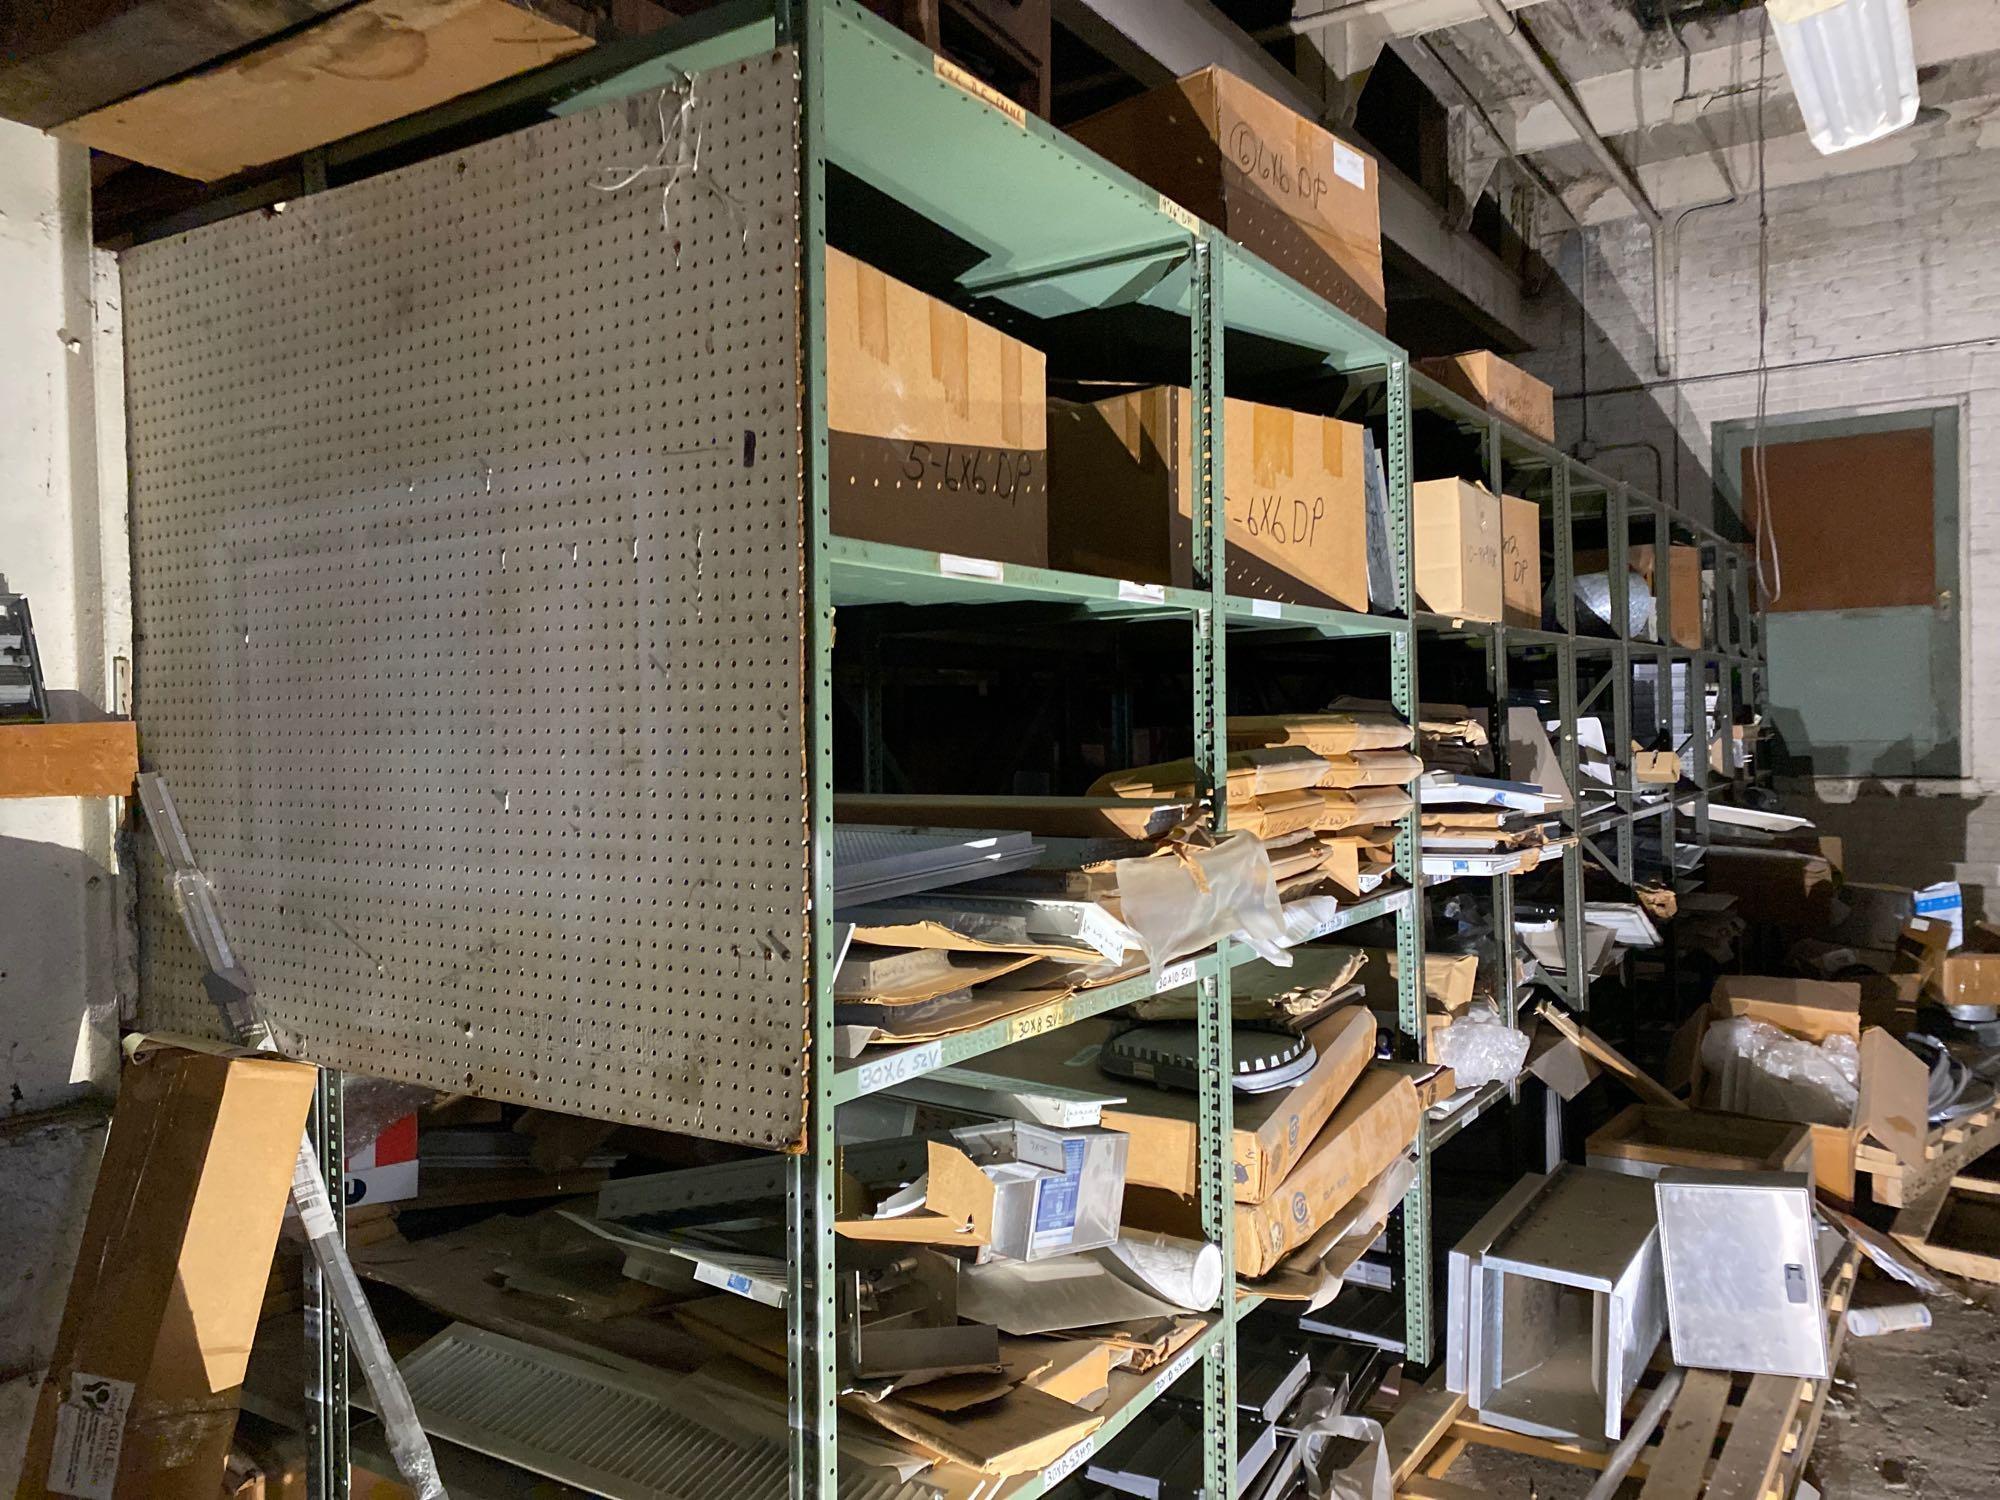 (20) sections of aluminum and metal vents, registers, louvers and more. All one money.